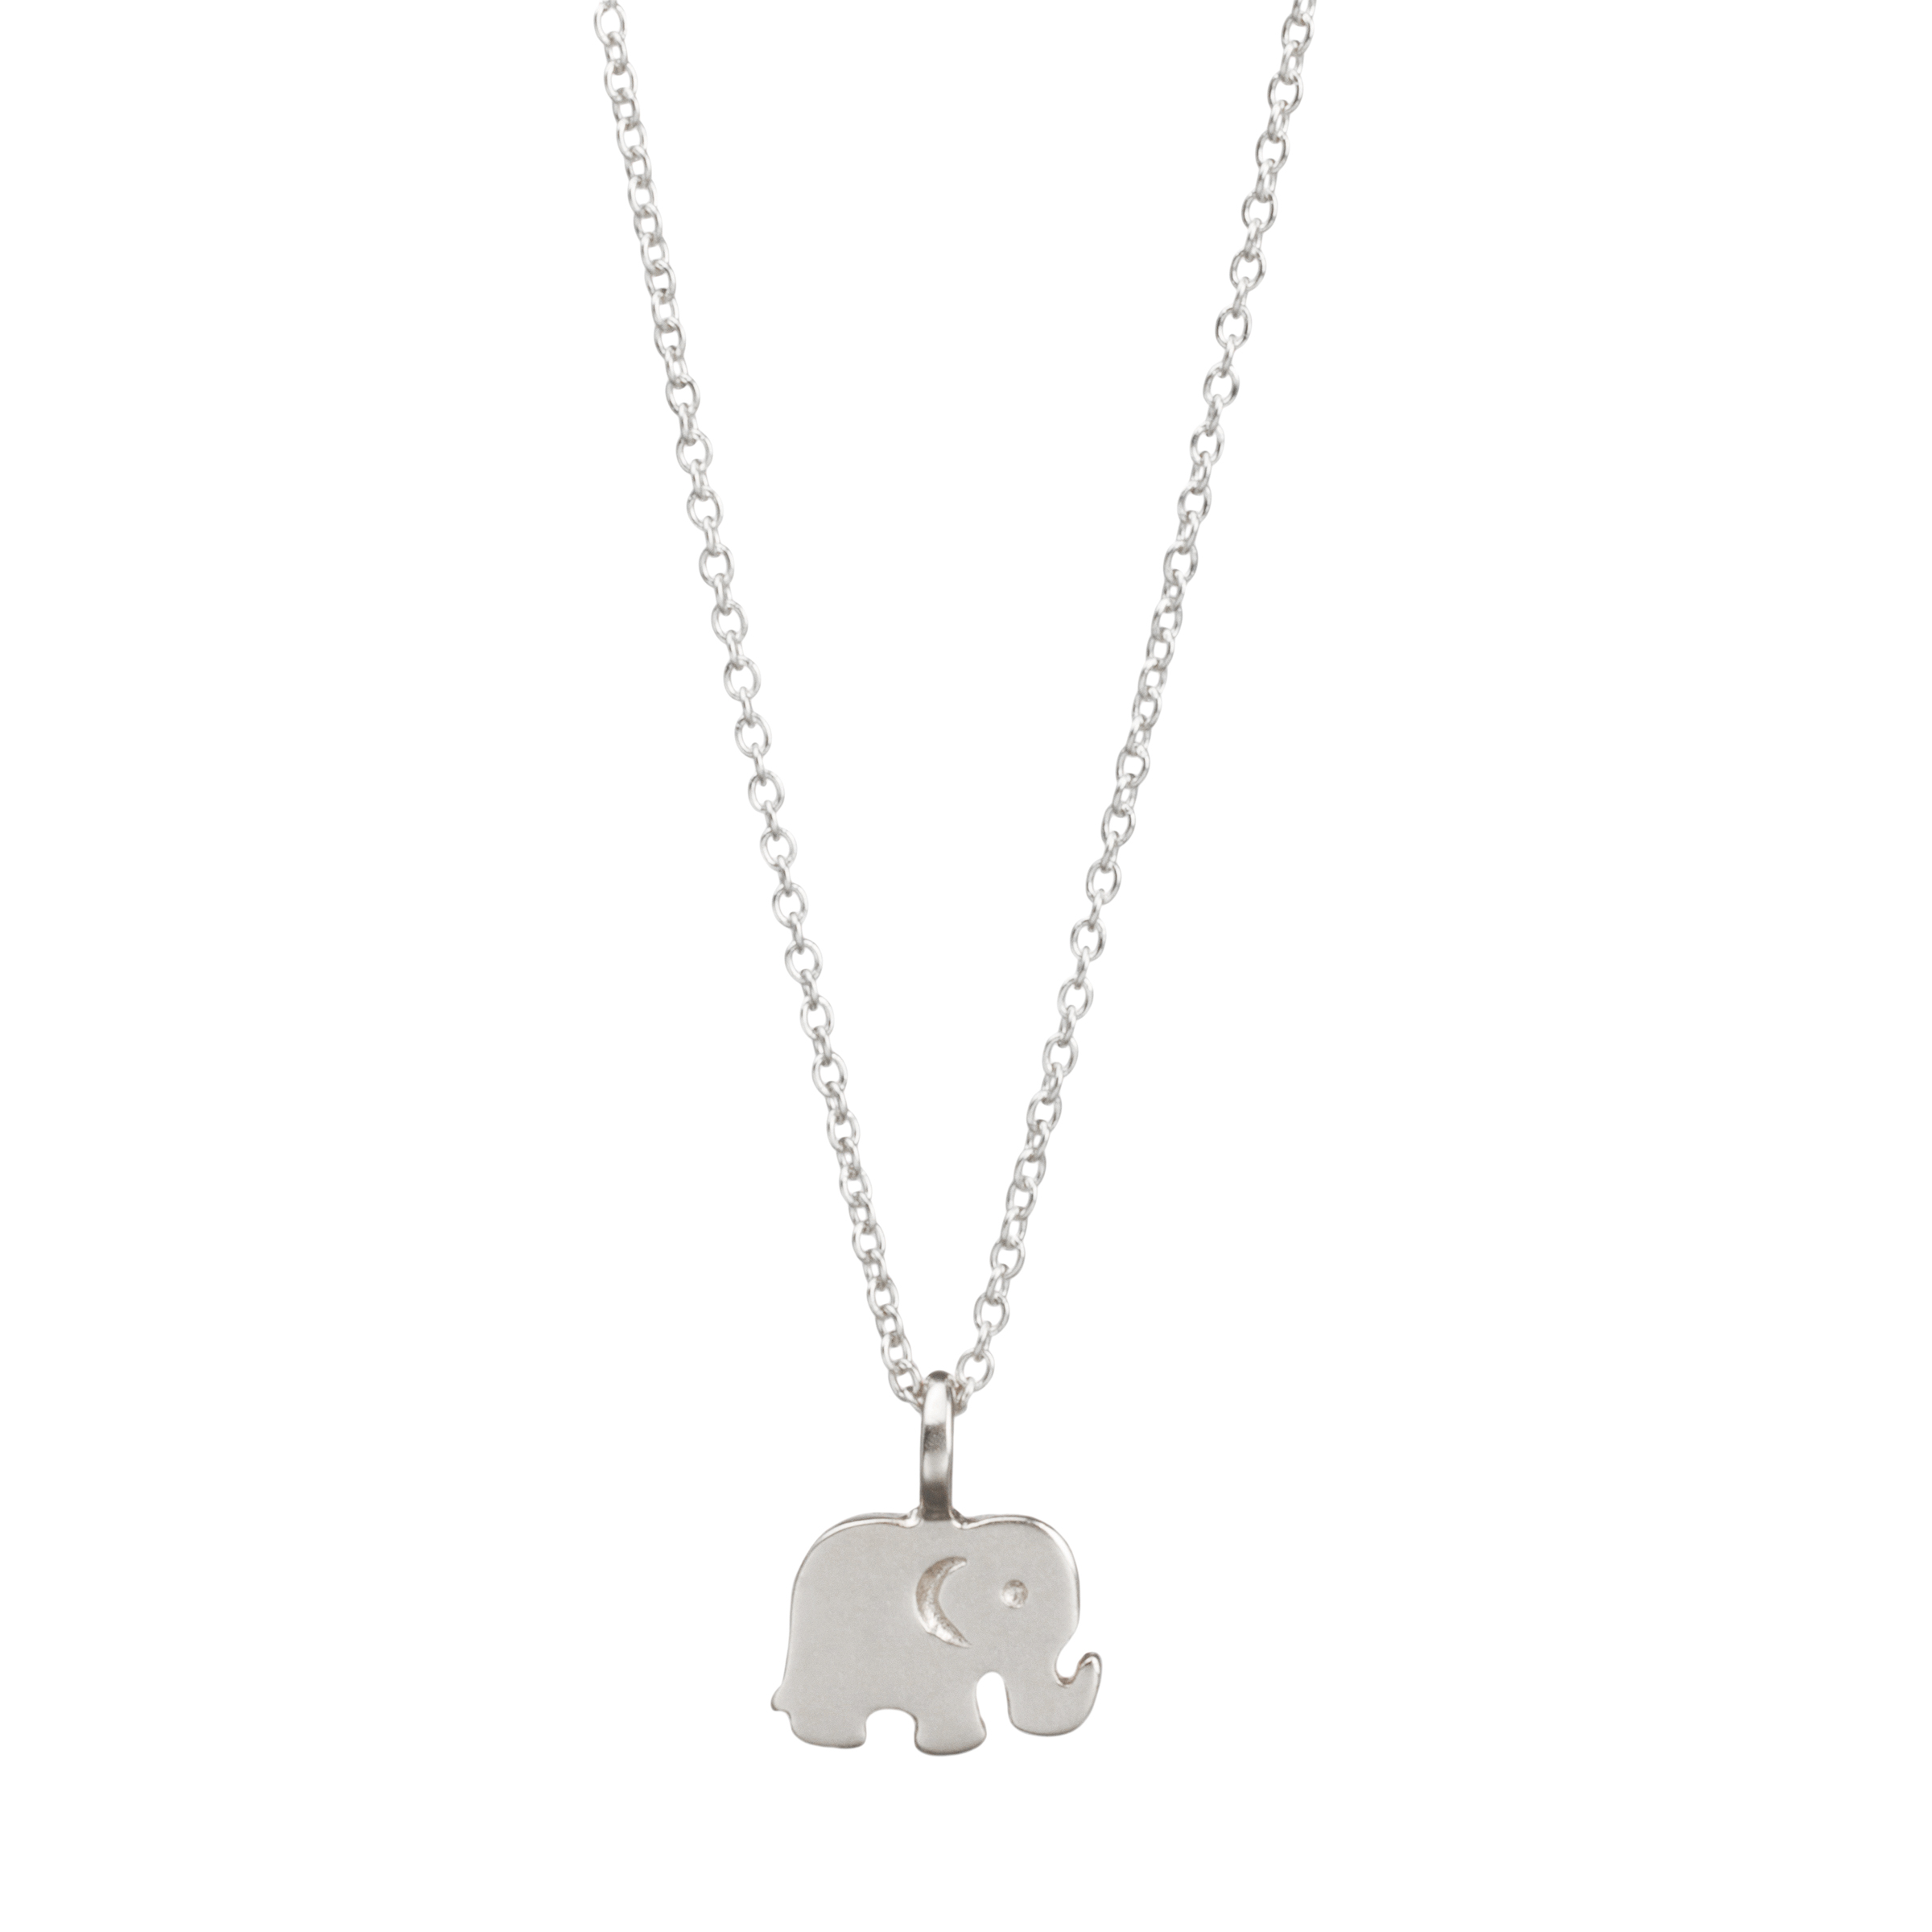 Good Luck Elephant Charm Necklace, Sterling Silver | Dogeared